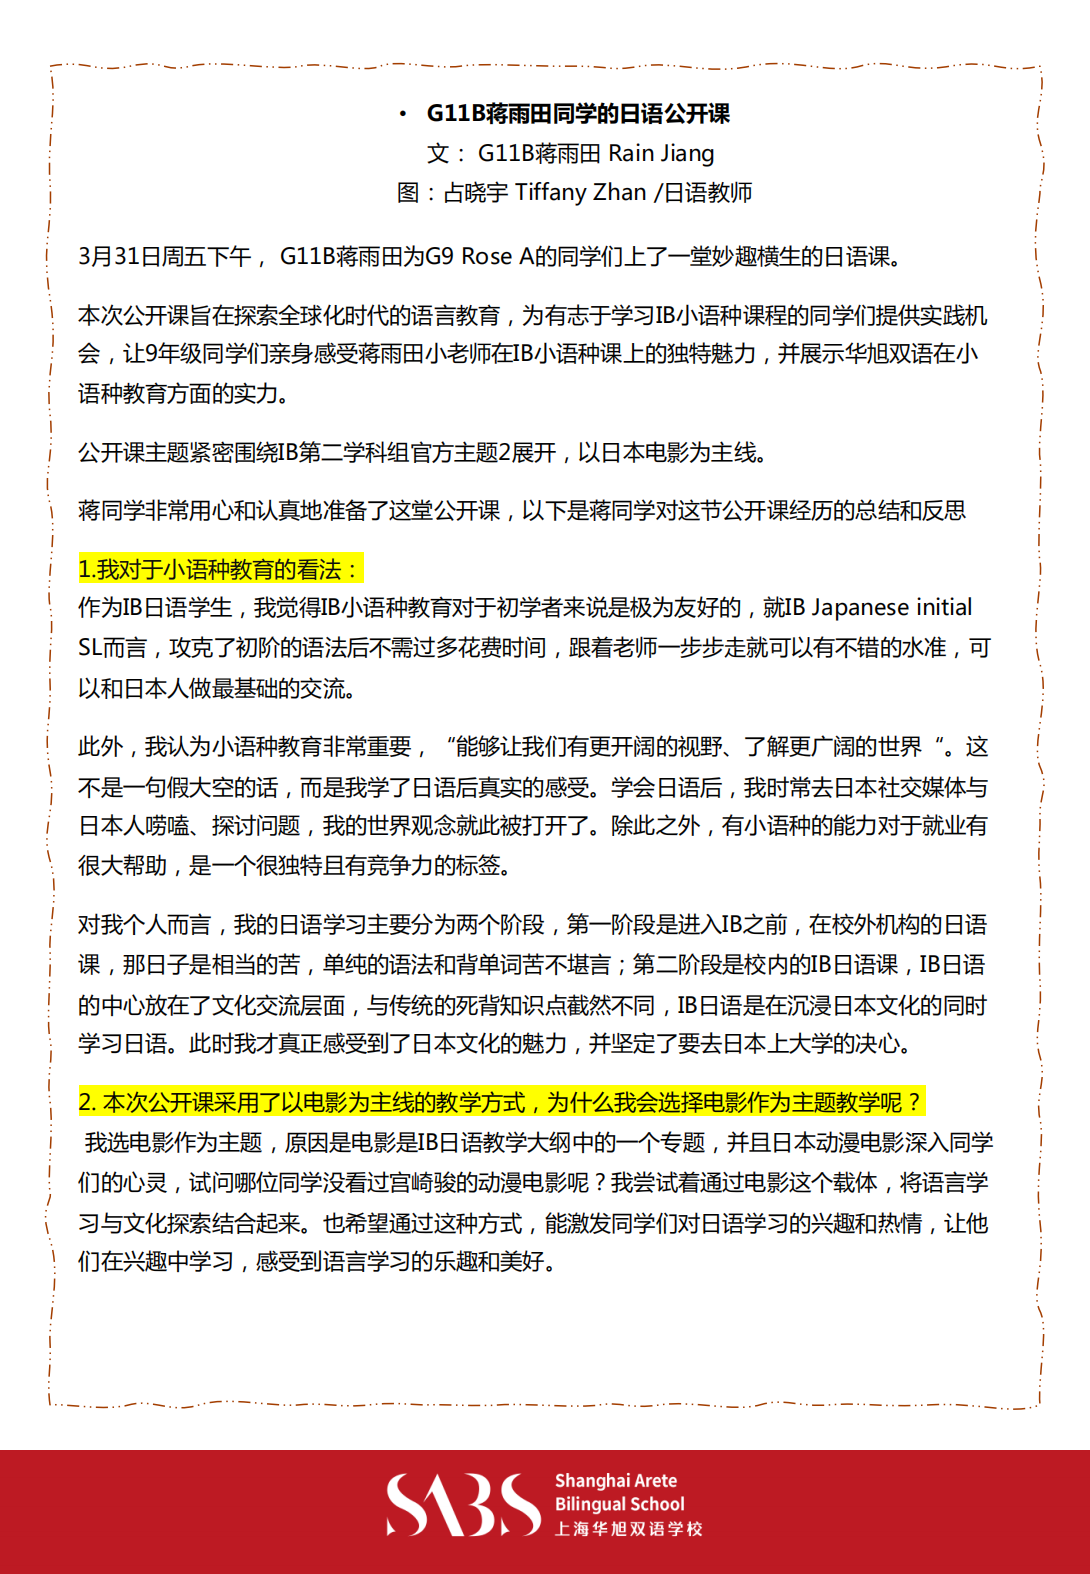 HS 4th Issue Newsletter pptx（Chinese）_13.png